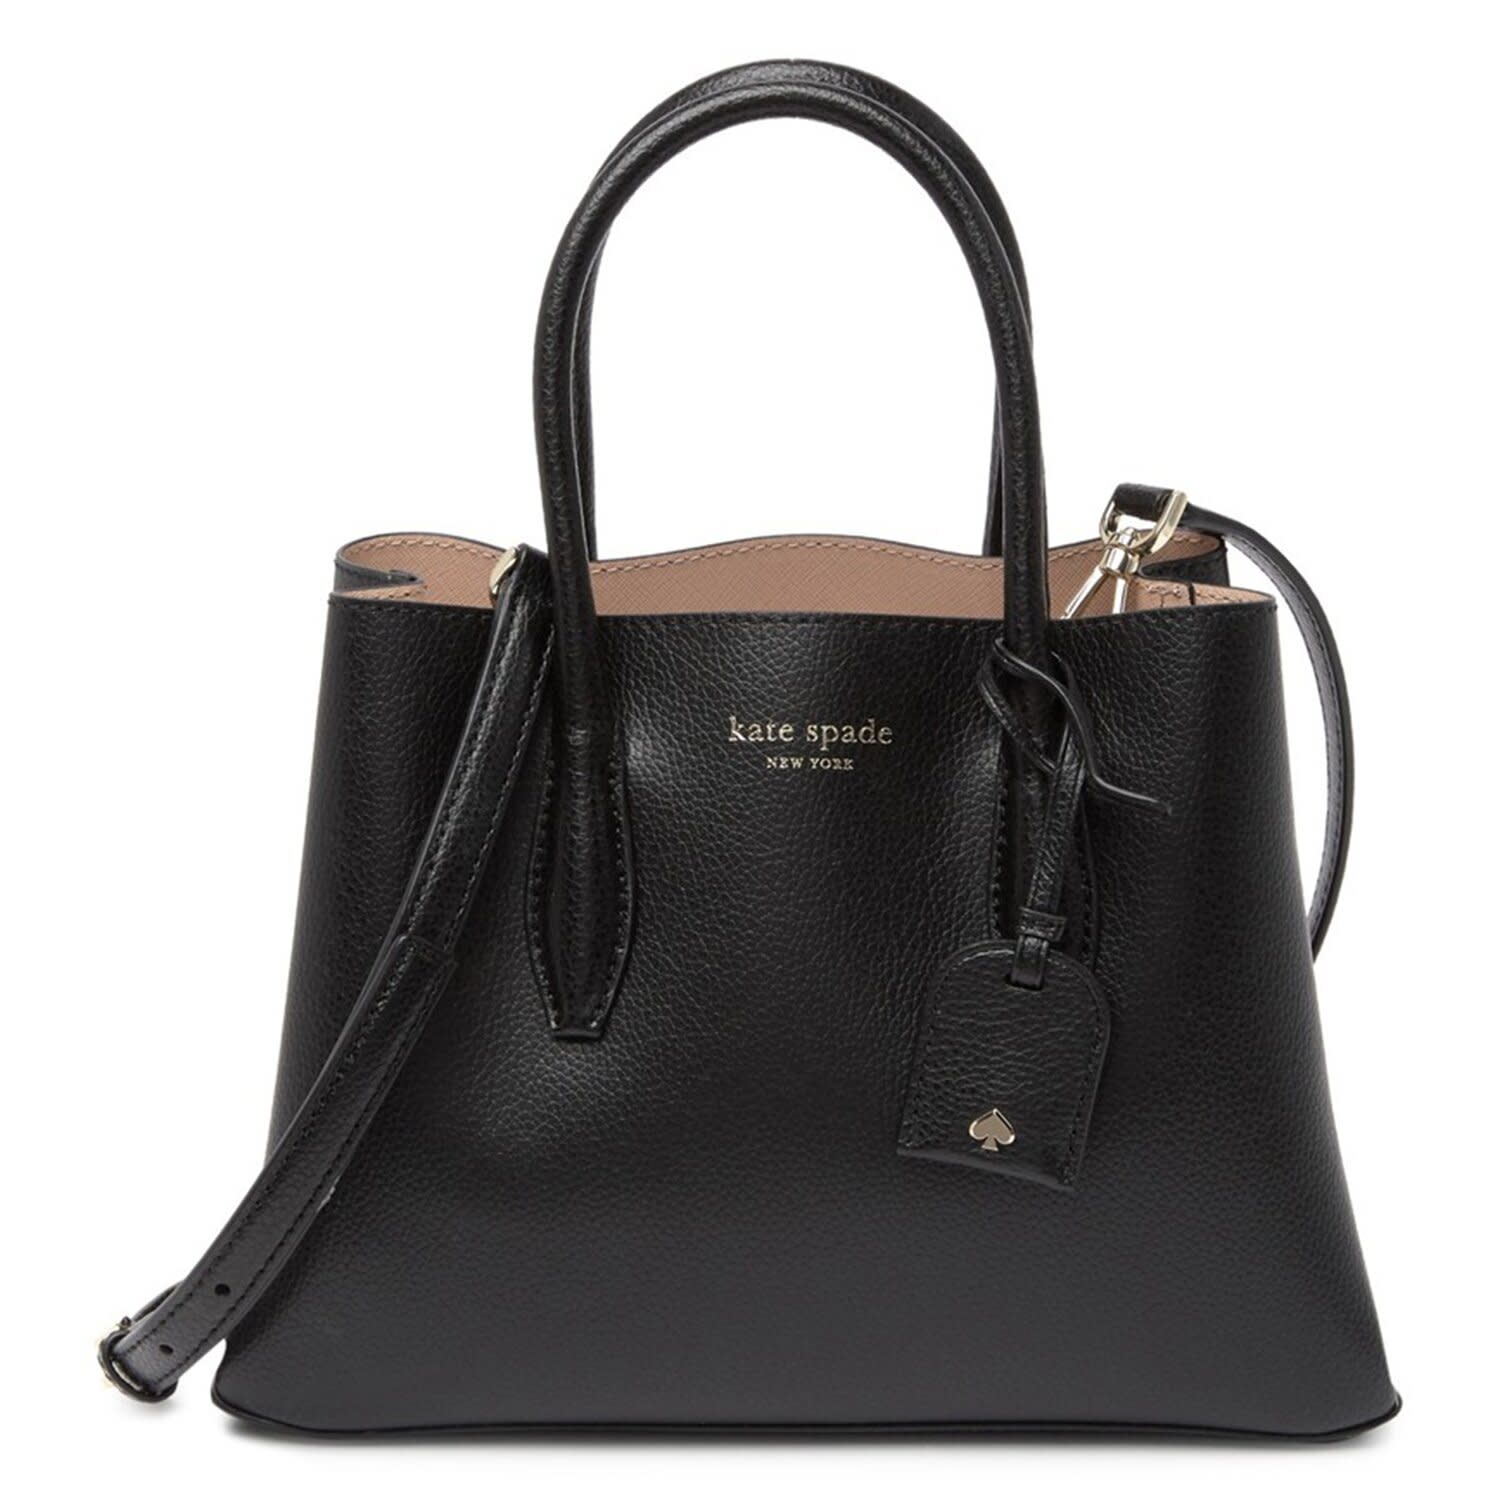 Kate Spade Handbags and Accessories Are on Major Sale at Nordstrom Rack — but Only for a Limited ...